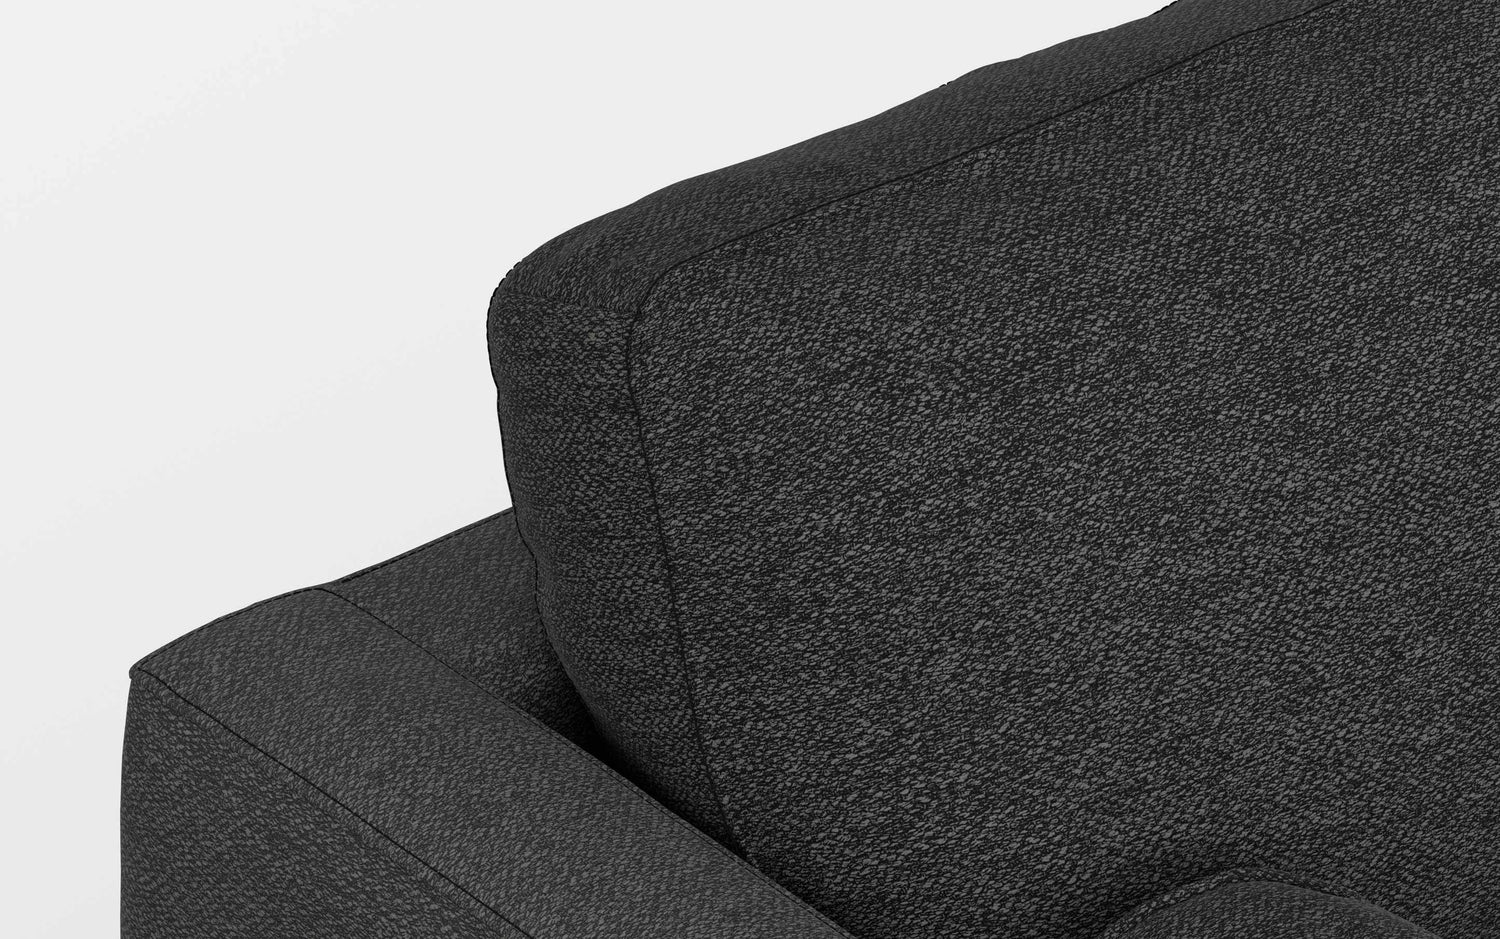 Charcoal Grey Woven Polyester Fabric | Morrison 89-inch Sofa and Ottoman Set